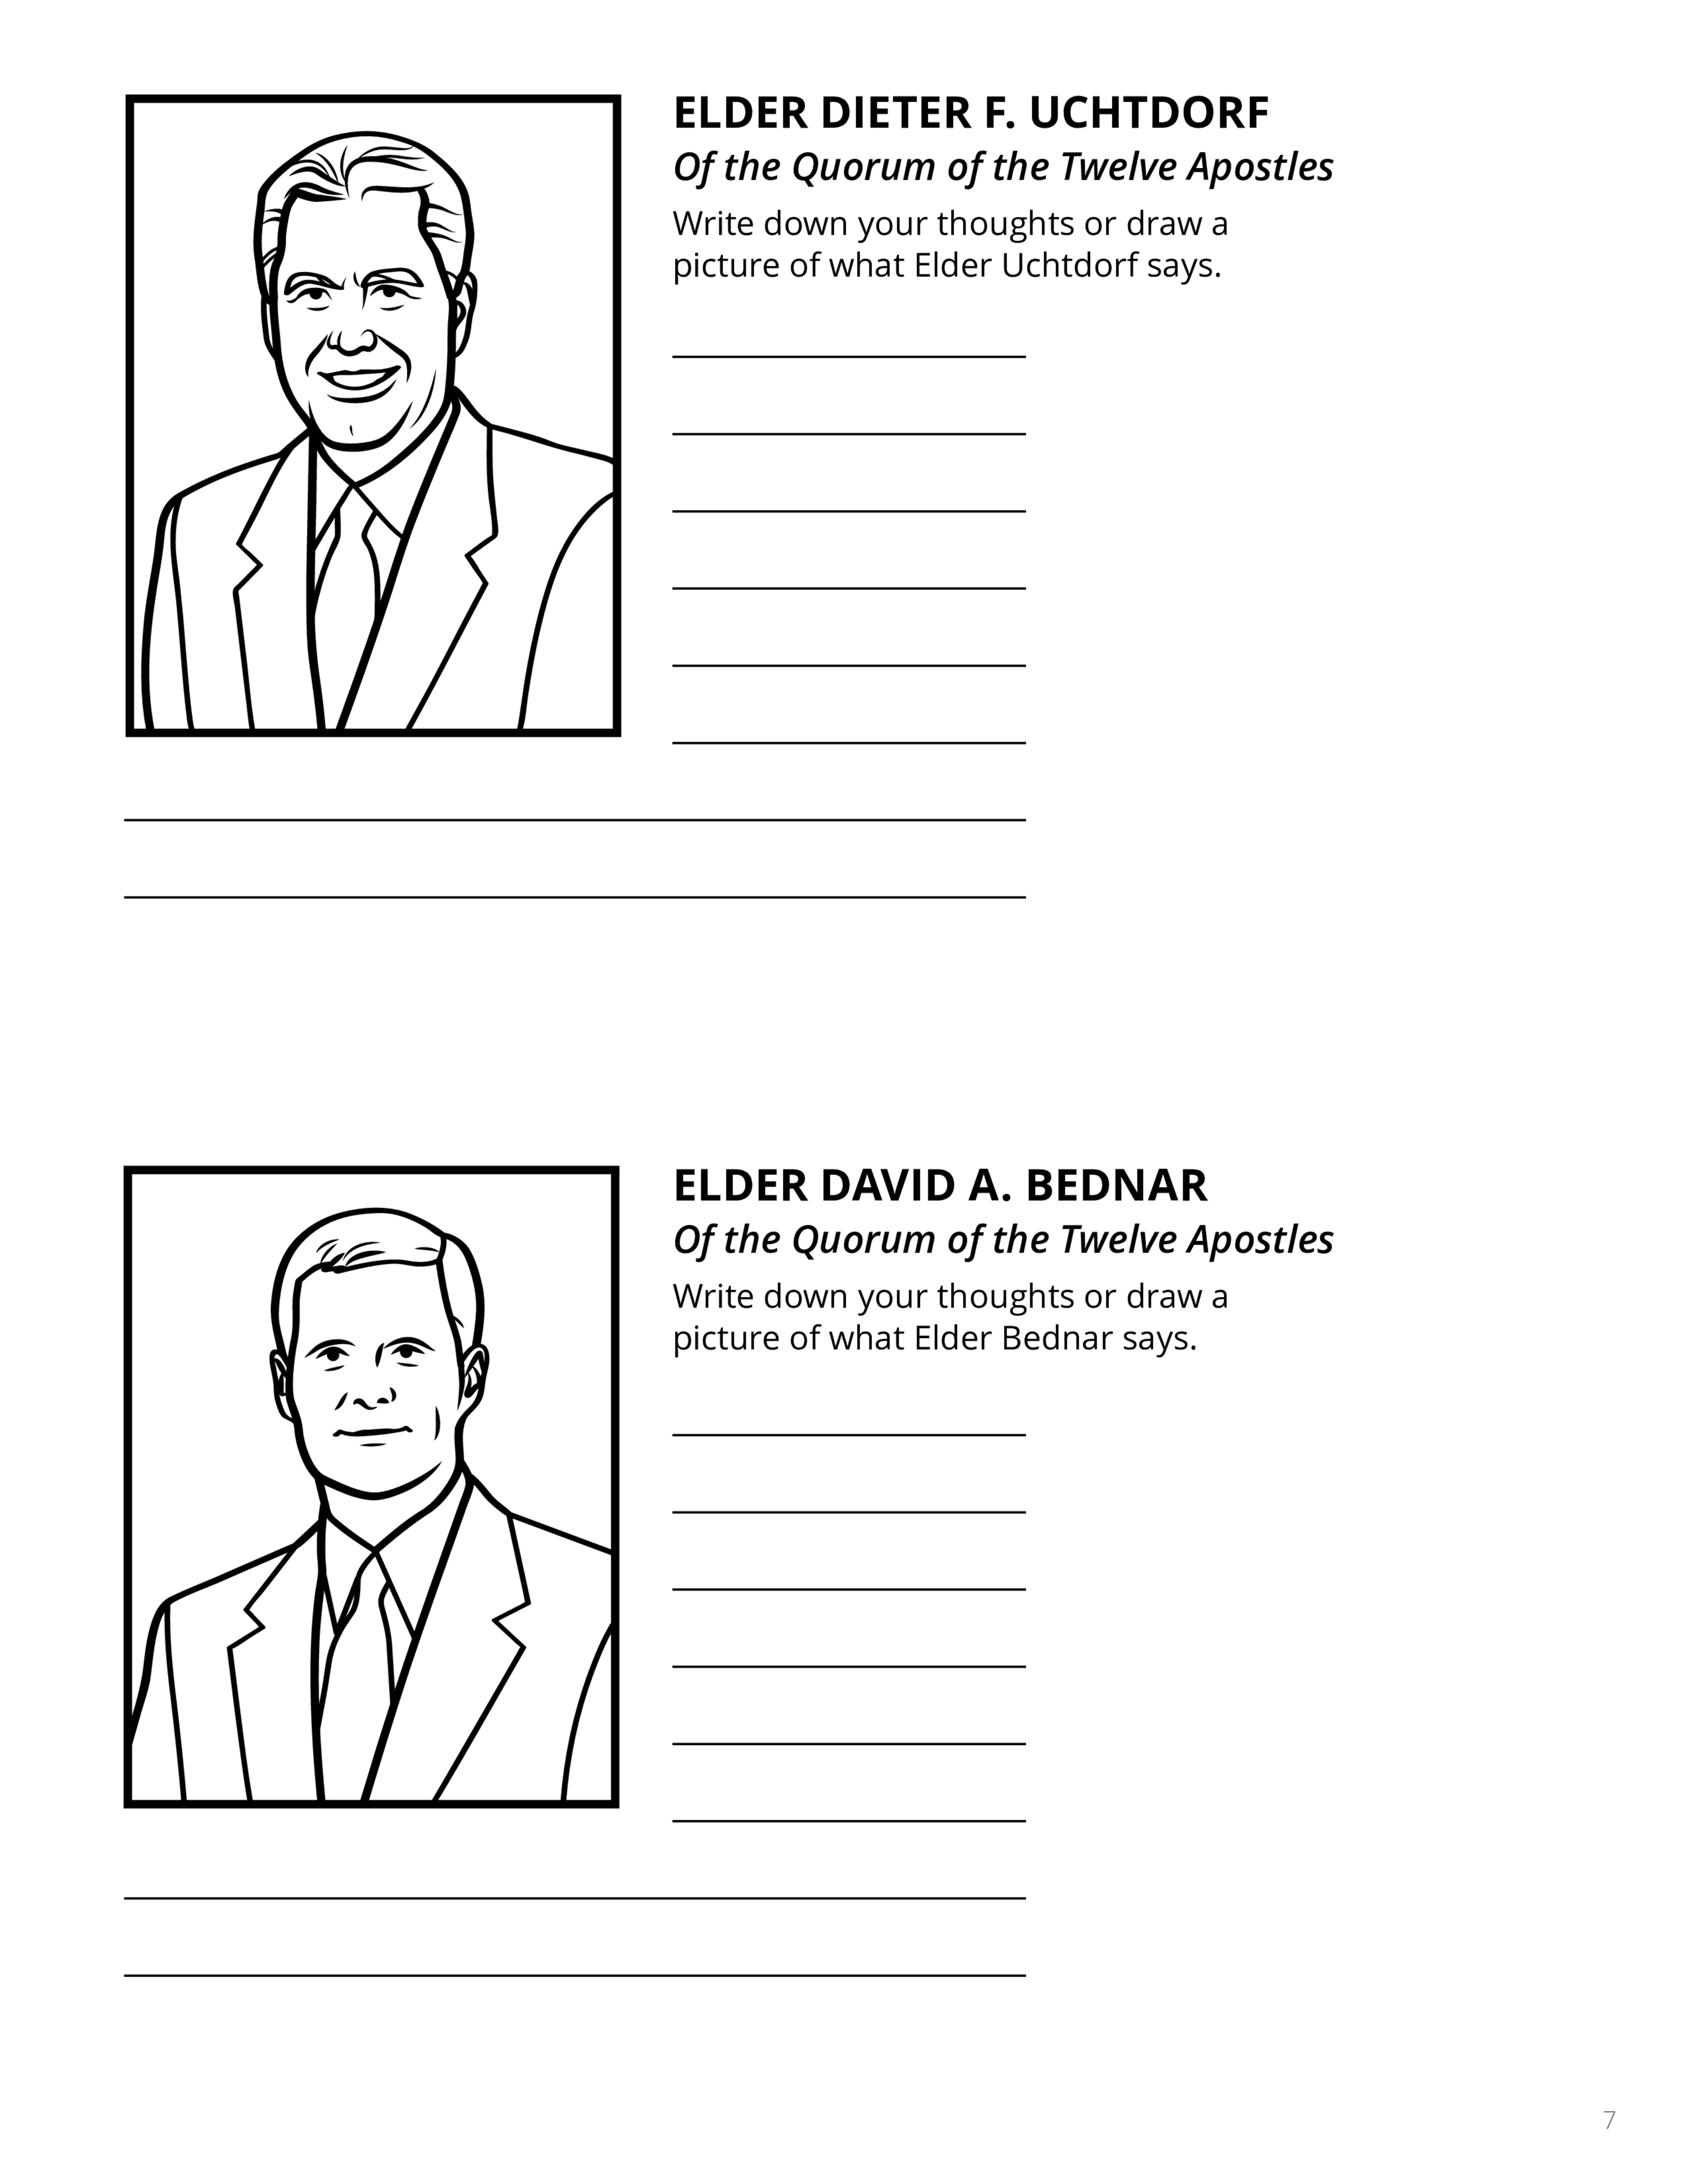 An activity page to encourage children to listen and write down thoughts or draw a picture of what Dieter F. Uchtdorf and David A. Bednar say.